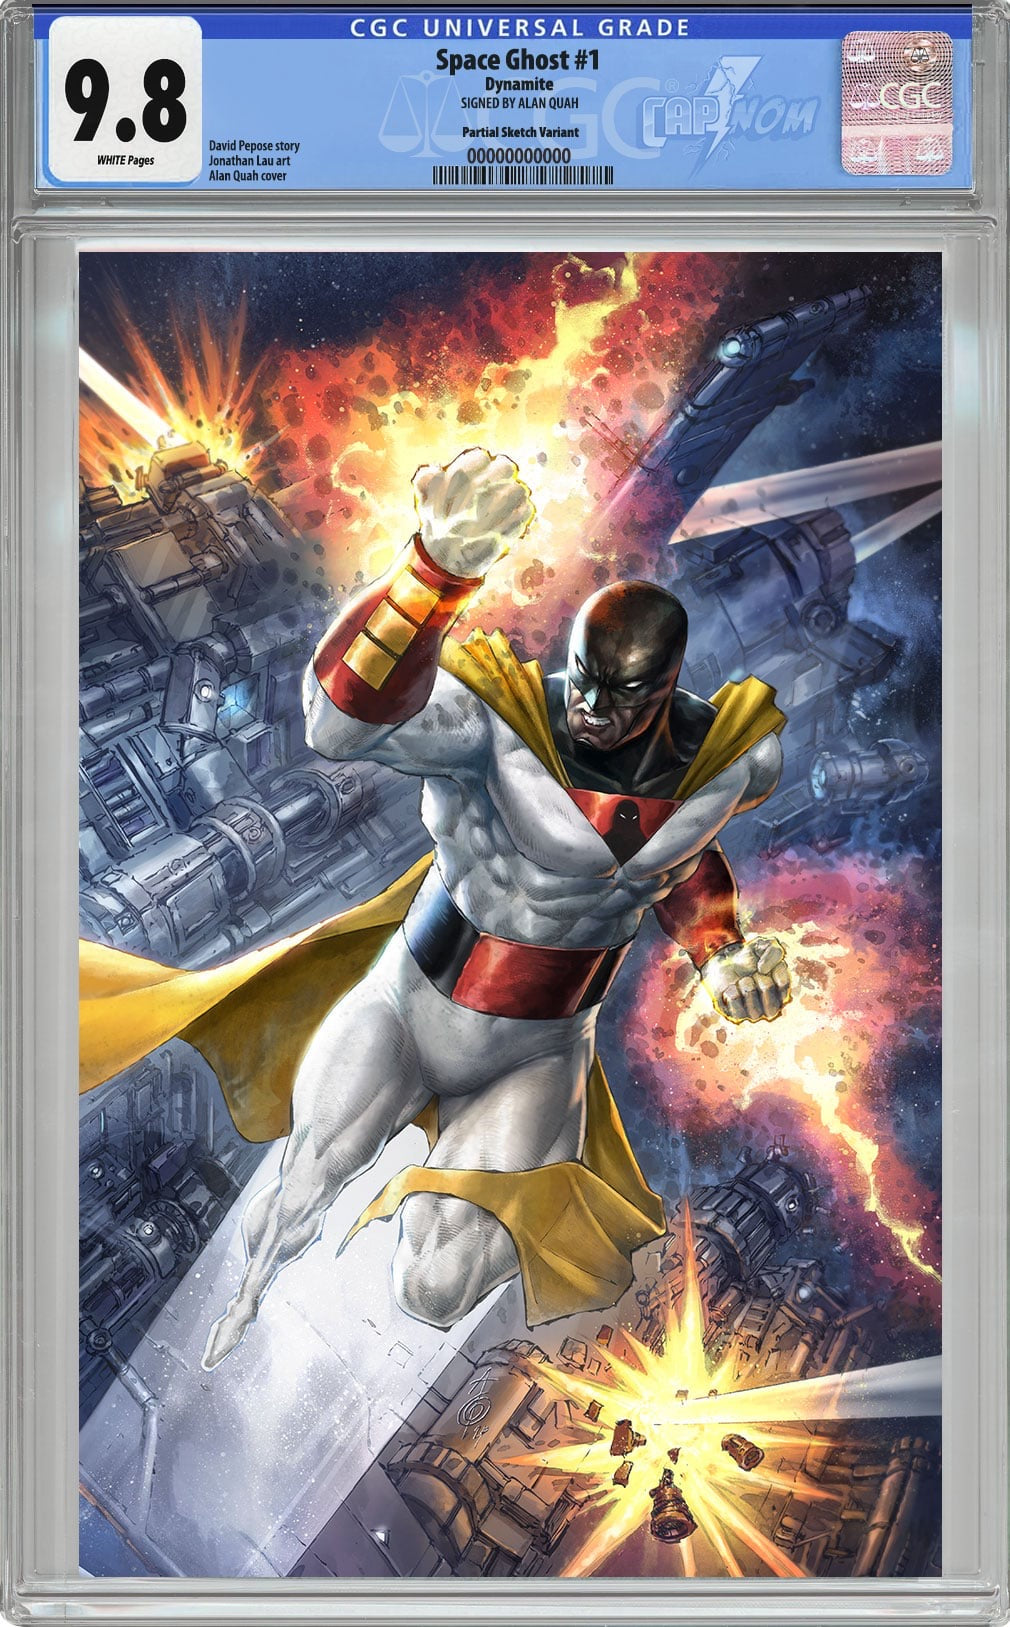 Space Ghost #1 Full Wraparound Virgin Cover by Alan Quah CGC 9.8 Blue Label